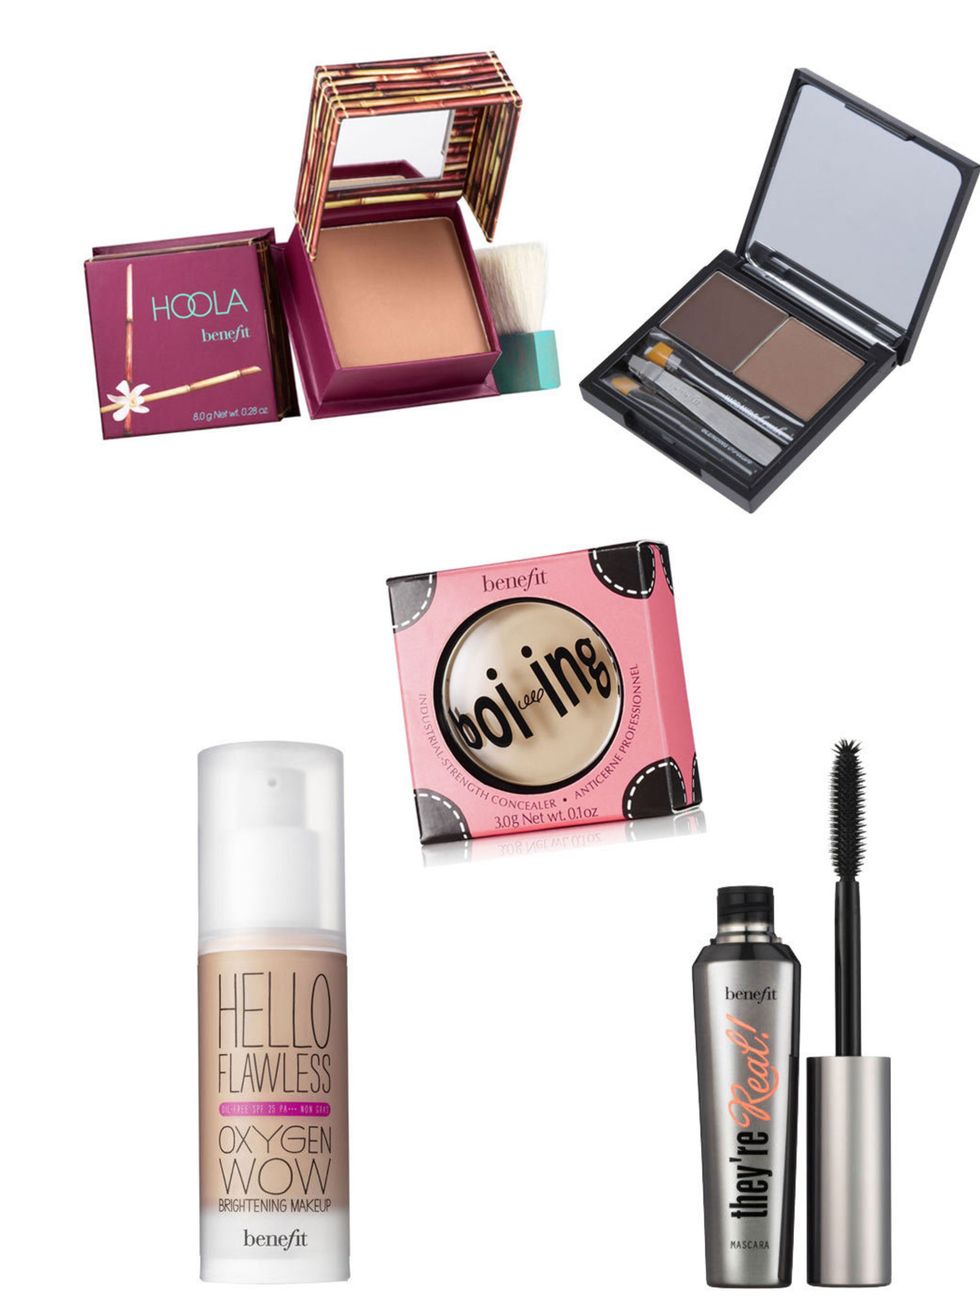 <p><strong>The brand</strong></p><p>Twin sisters Jean and Jane Ford put their creative and entrepreneurial minds together to create the hugely successful <a href="http://www.benefitcosmetics.co.uk/">Benefit</a> brand. Its irrepressible combination of play